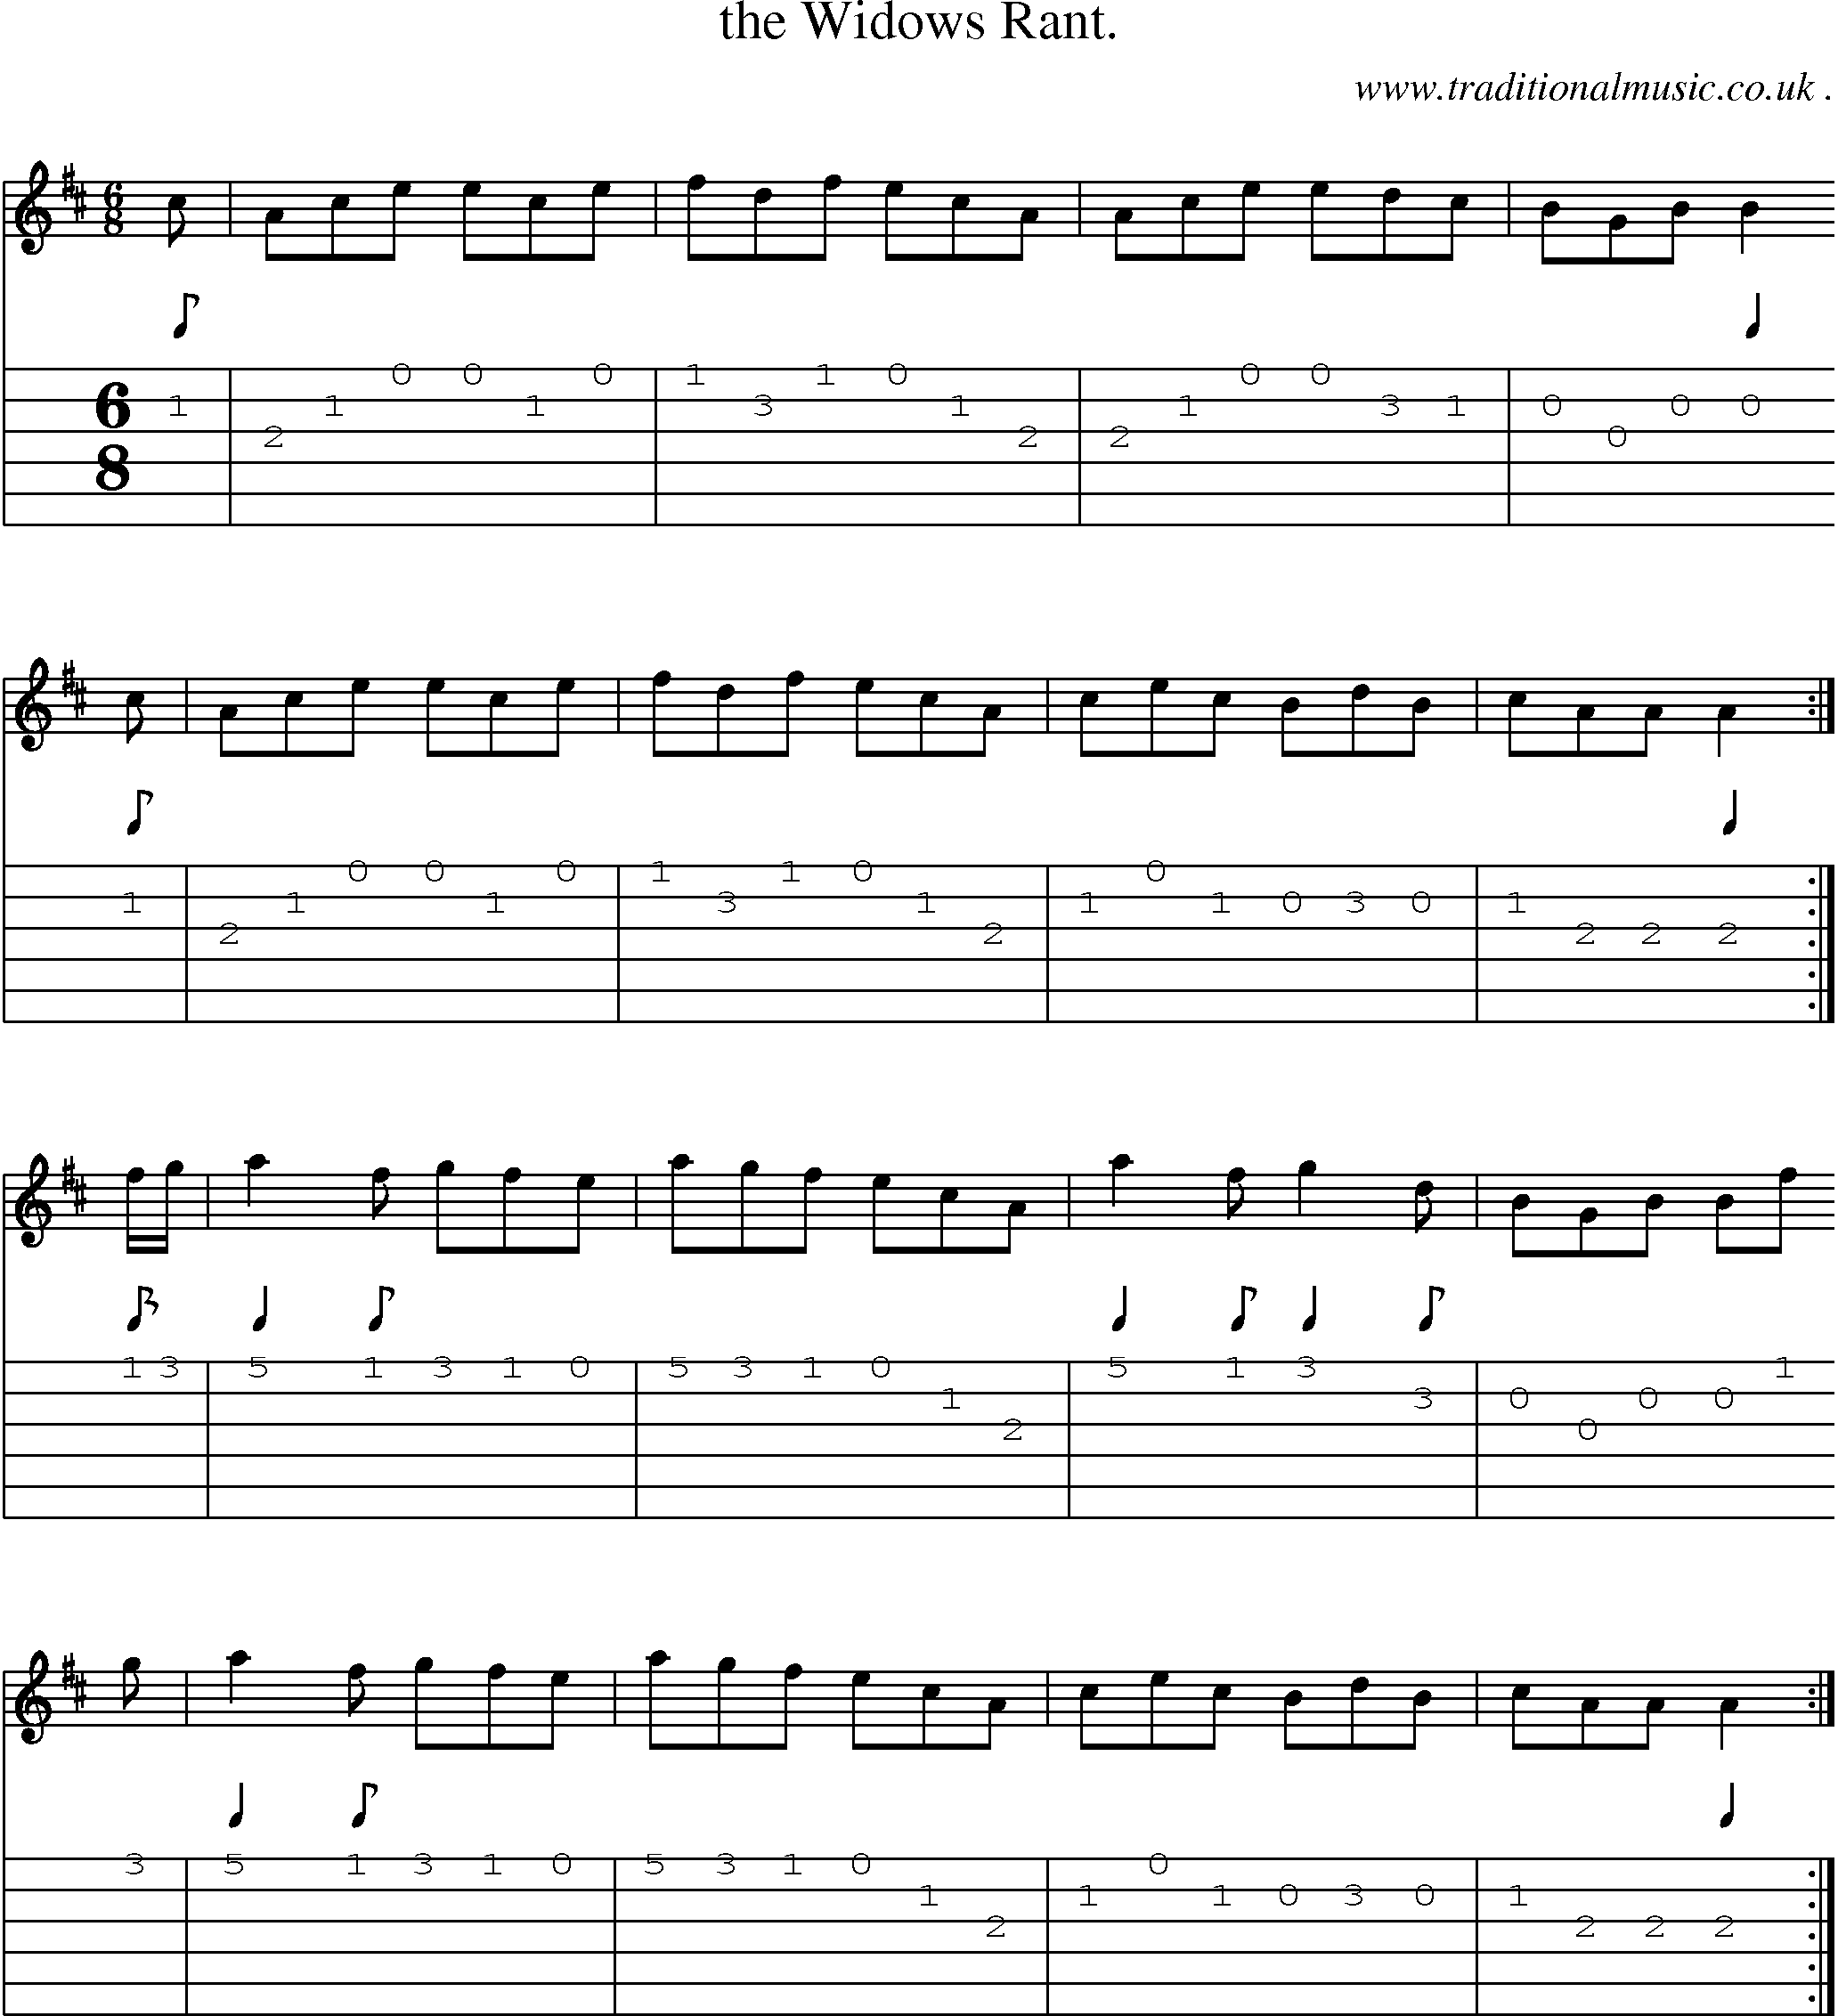 Sheet-Music and Guitar Tabs for The Widows Rant